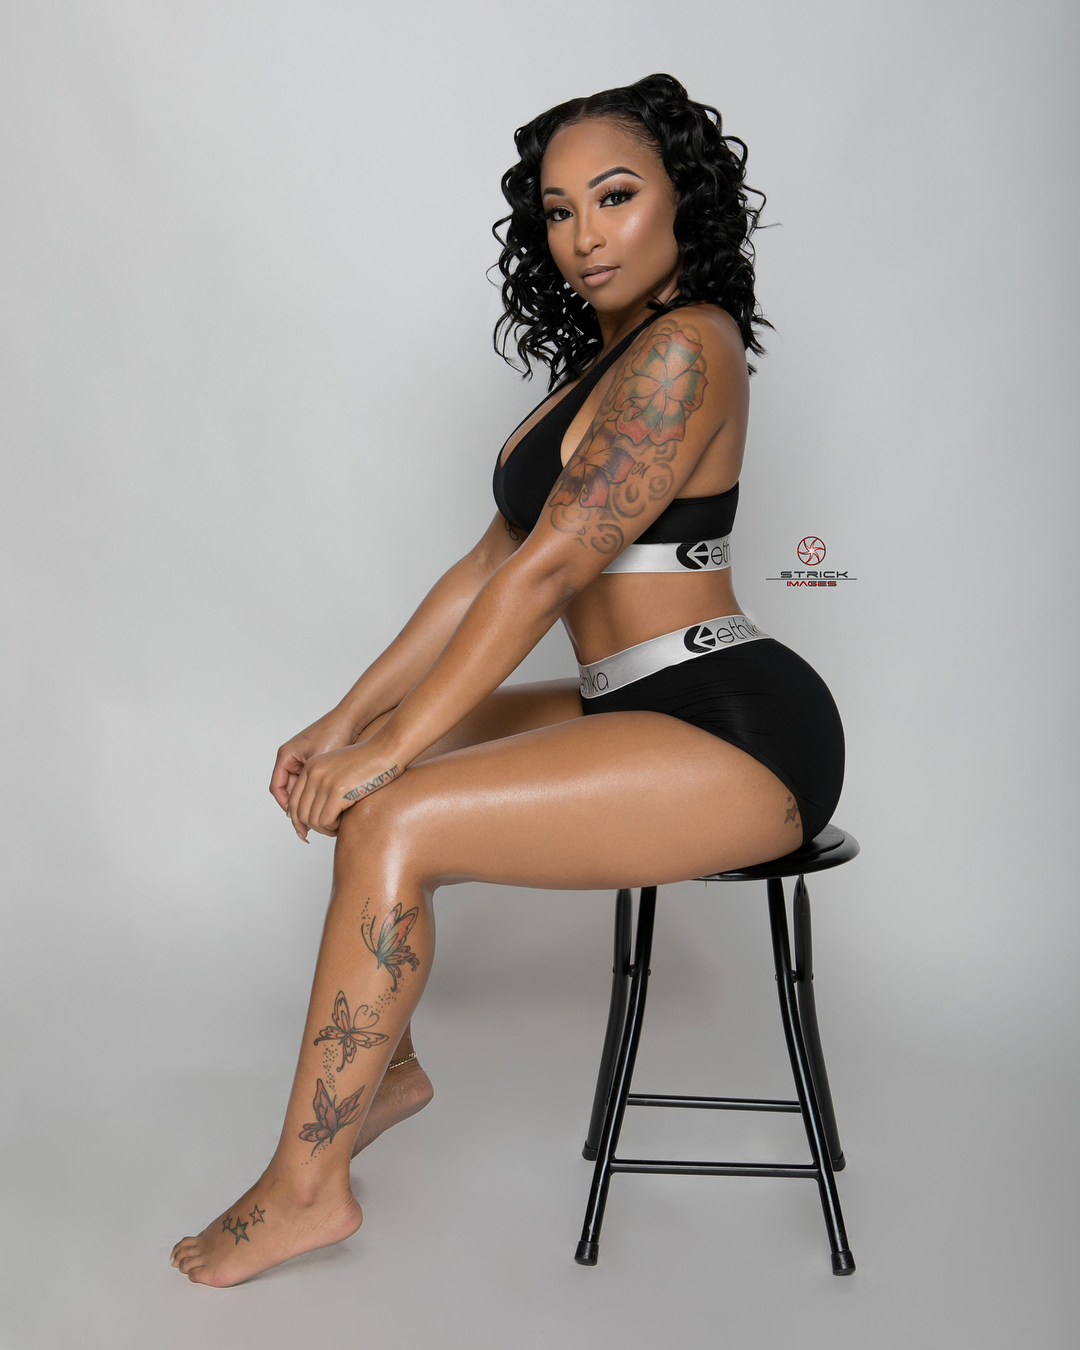 Starr China @starr_china x Strick Images 00166.